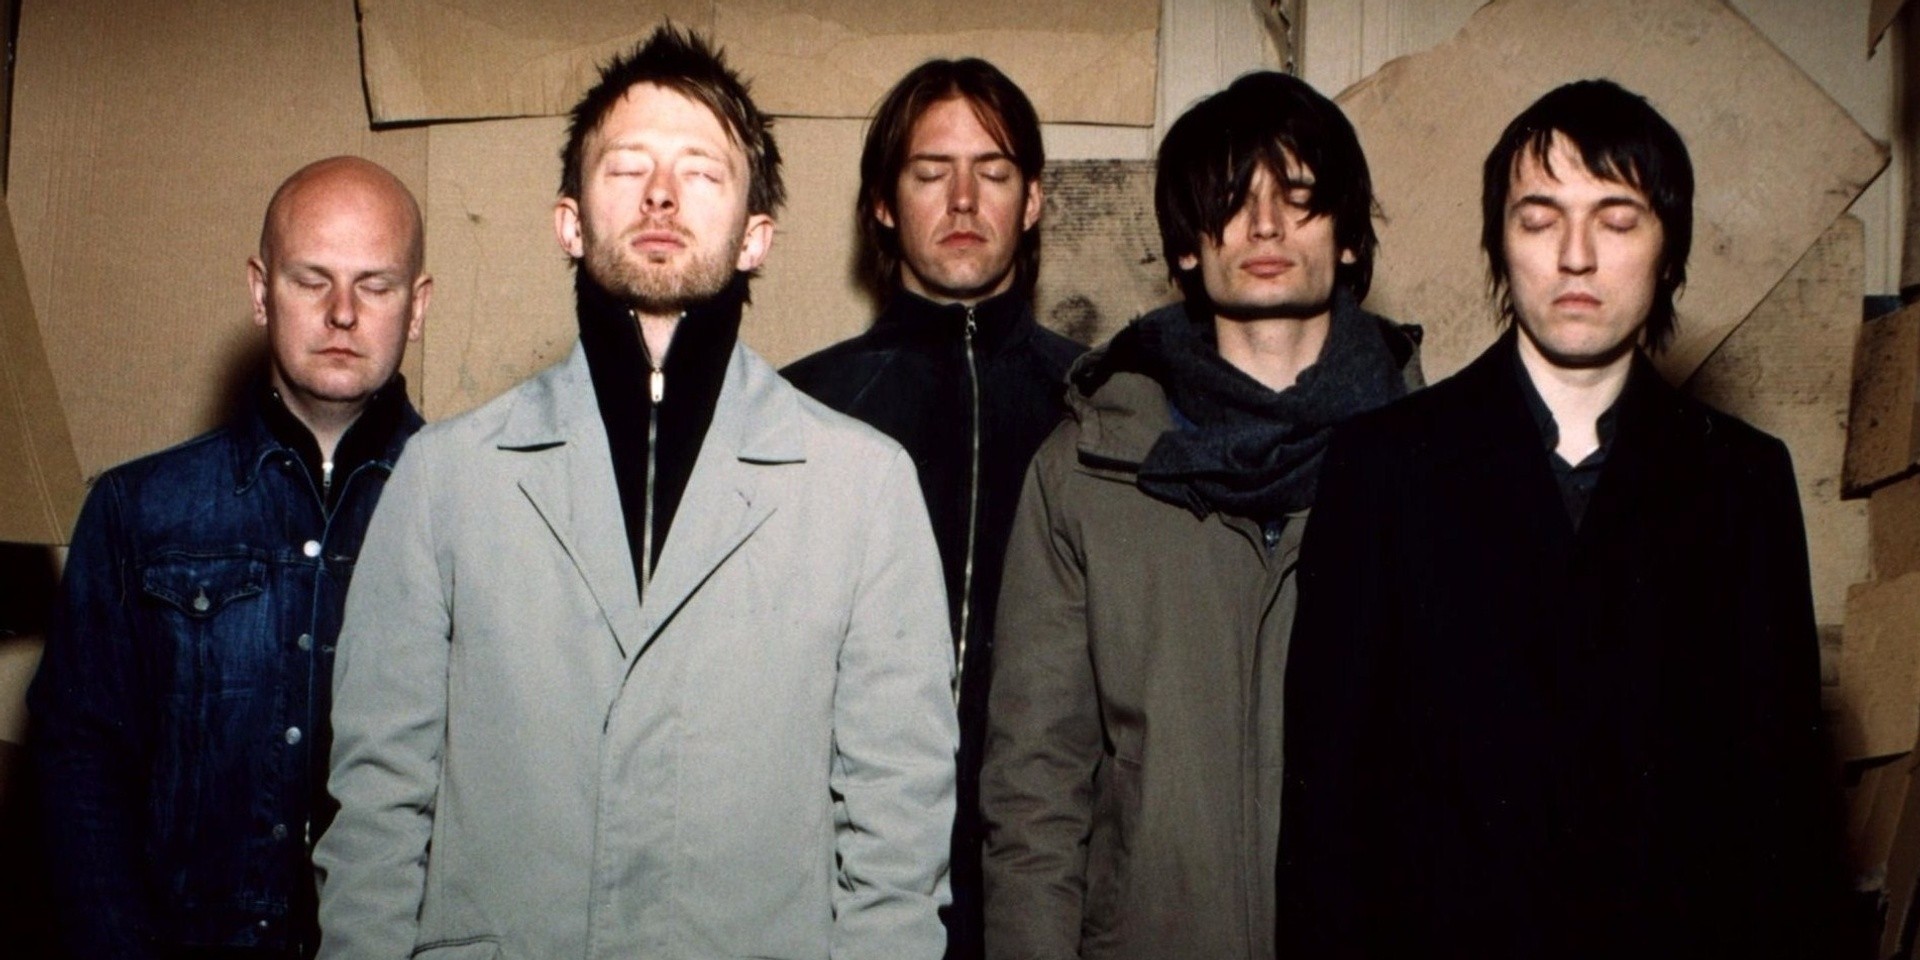 Radiohead's entire discography can now be found on YouTube